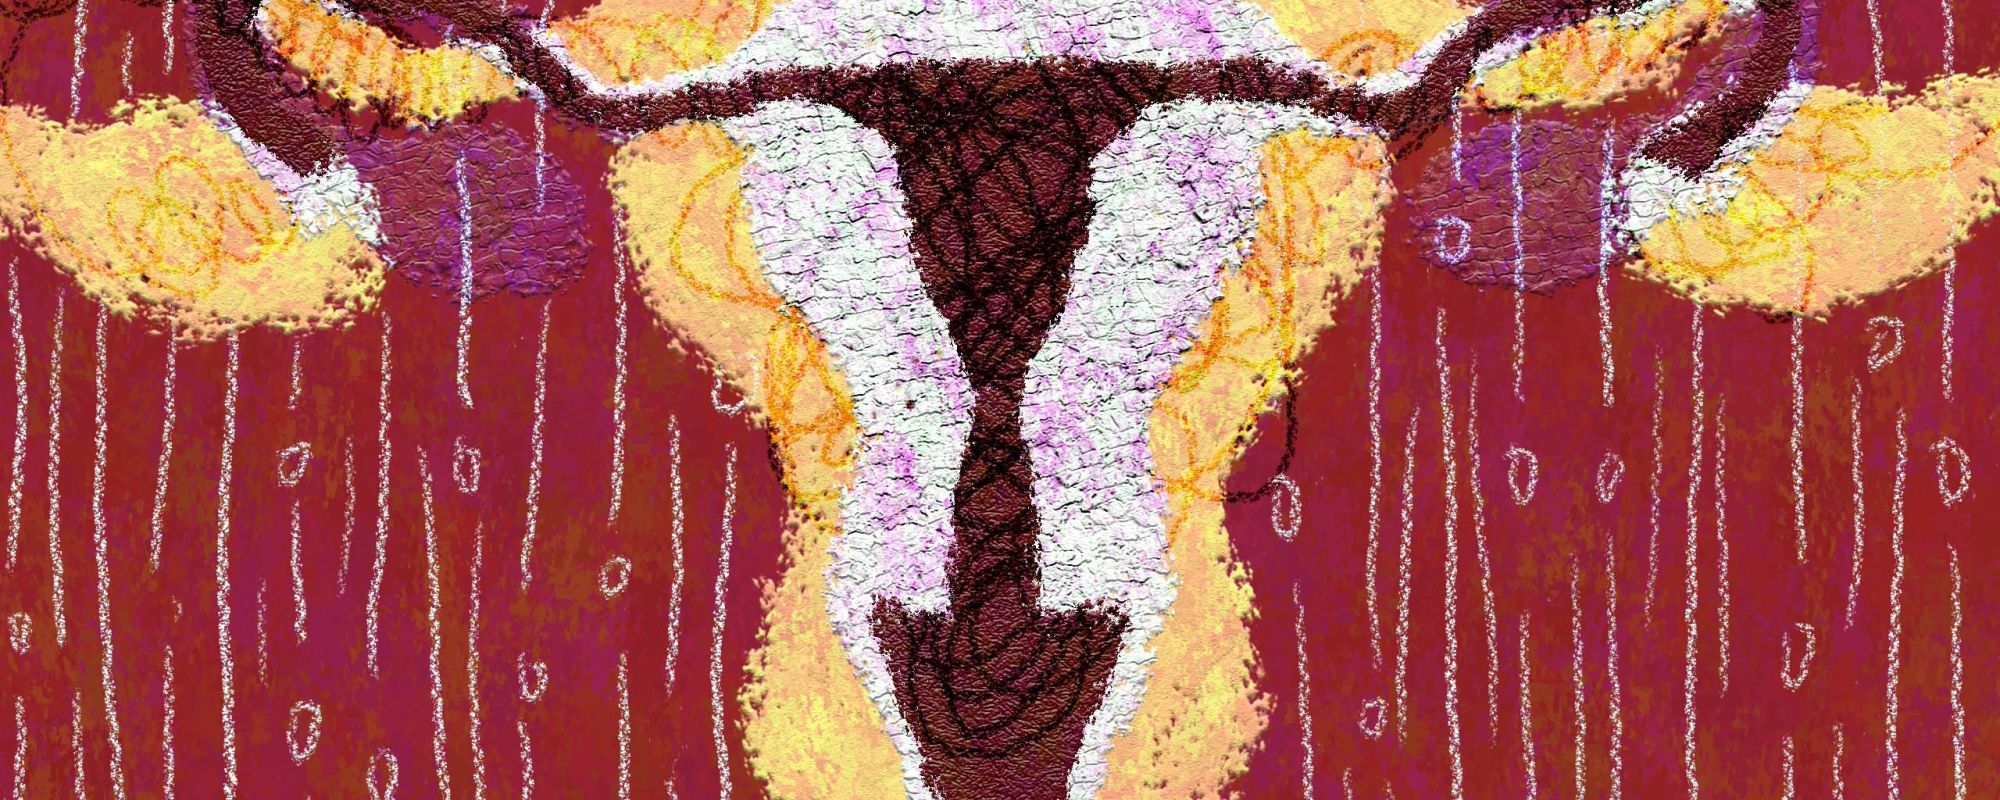 the shape of a uterus and ovaries against red background